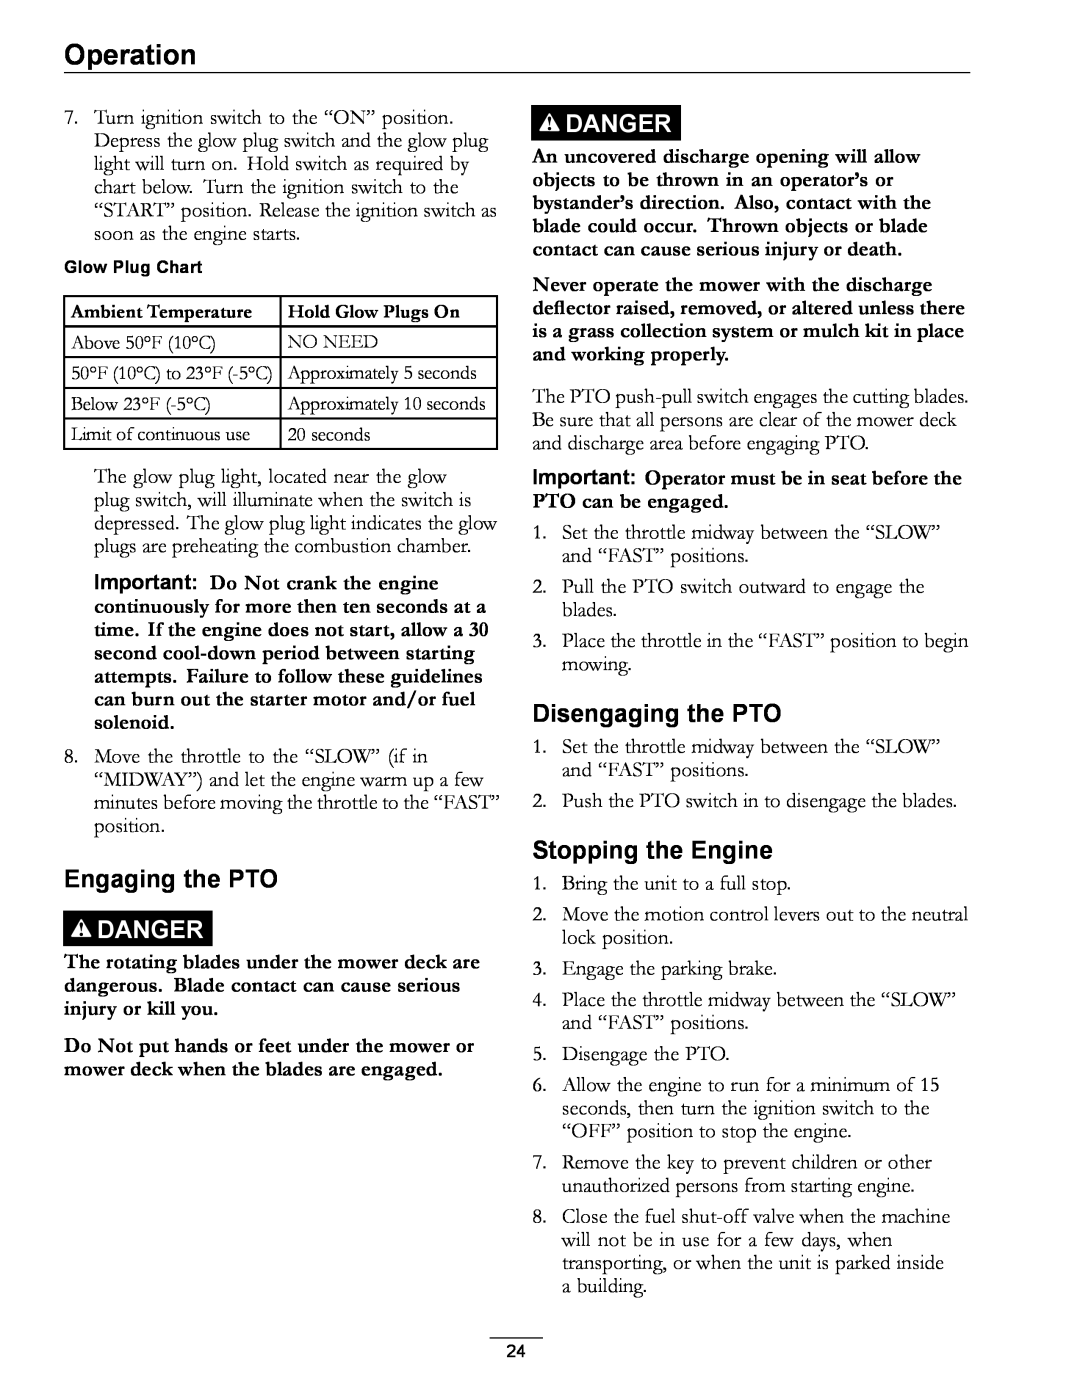 Exmark 920 manual Engaging the PTO, Disengaging the PTO, Stopping the Engine, Operation, Danger 